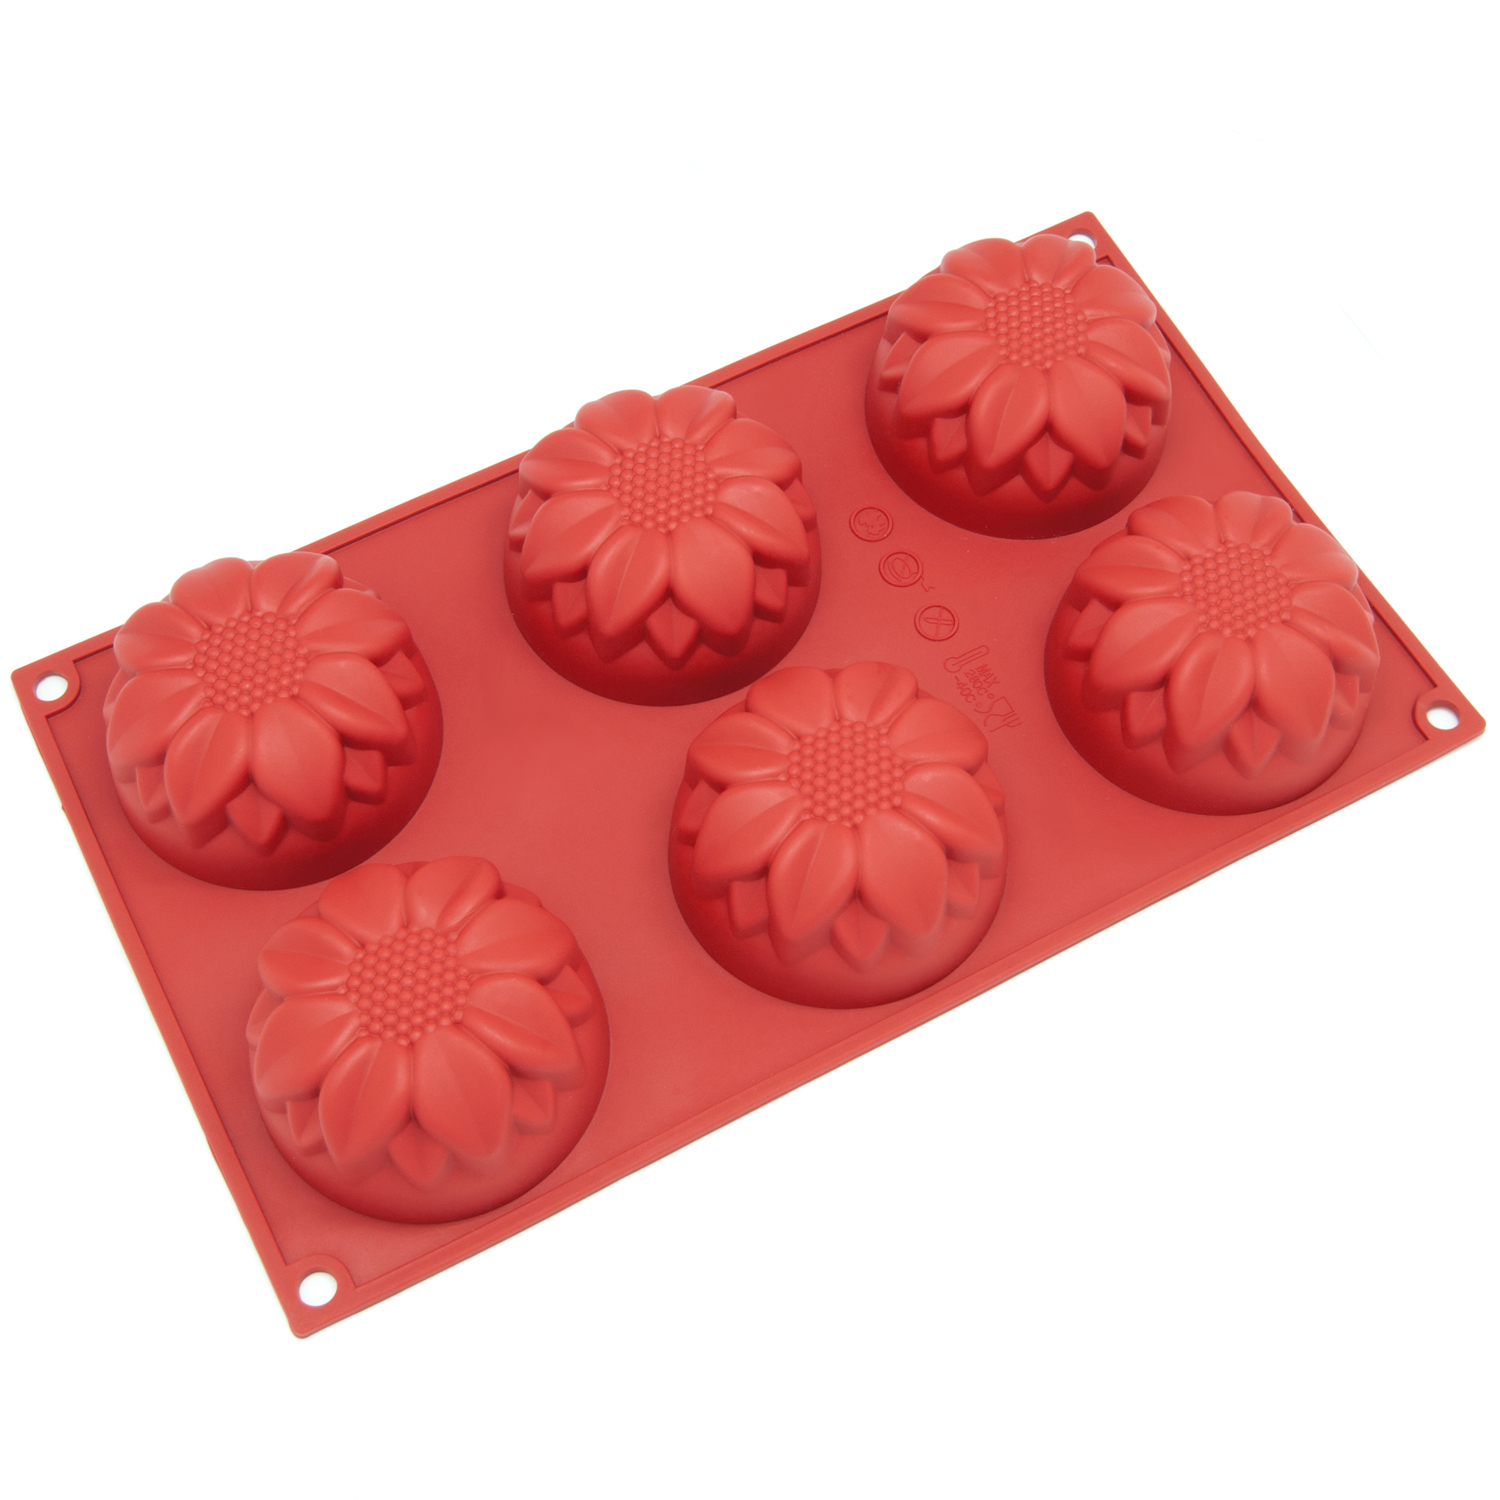 Freshware Silicone Mold, Soap Mold for Pudding, Muffin, Cupcake, Cheesecake and Soap, Sun Flower, 6-Cavity